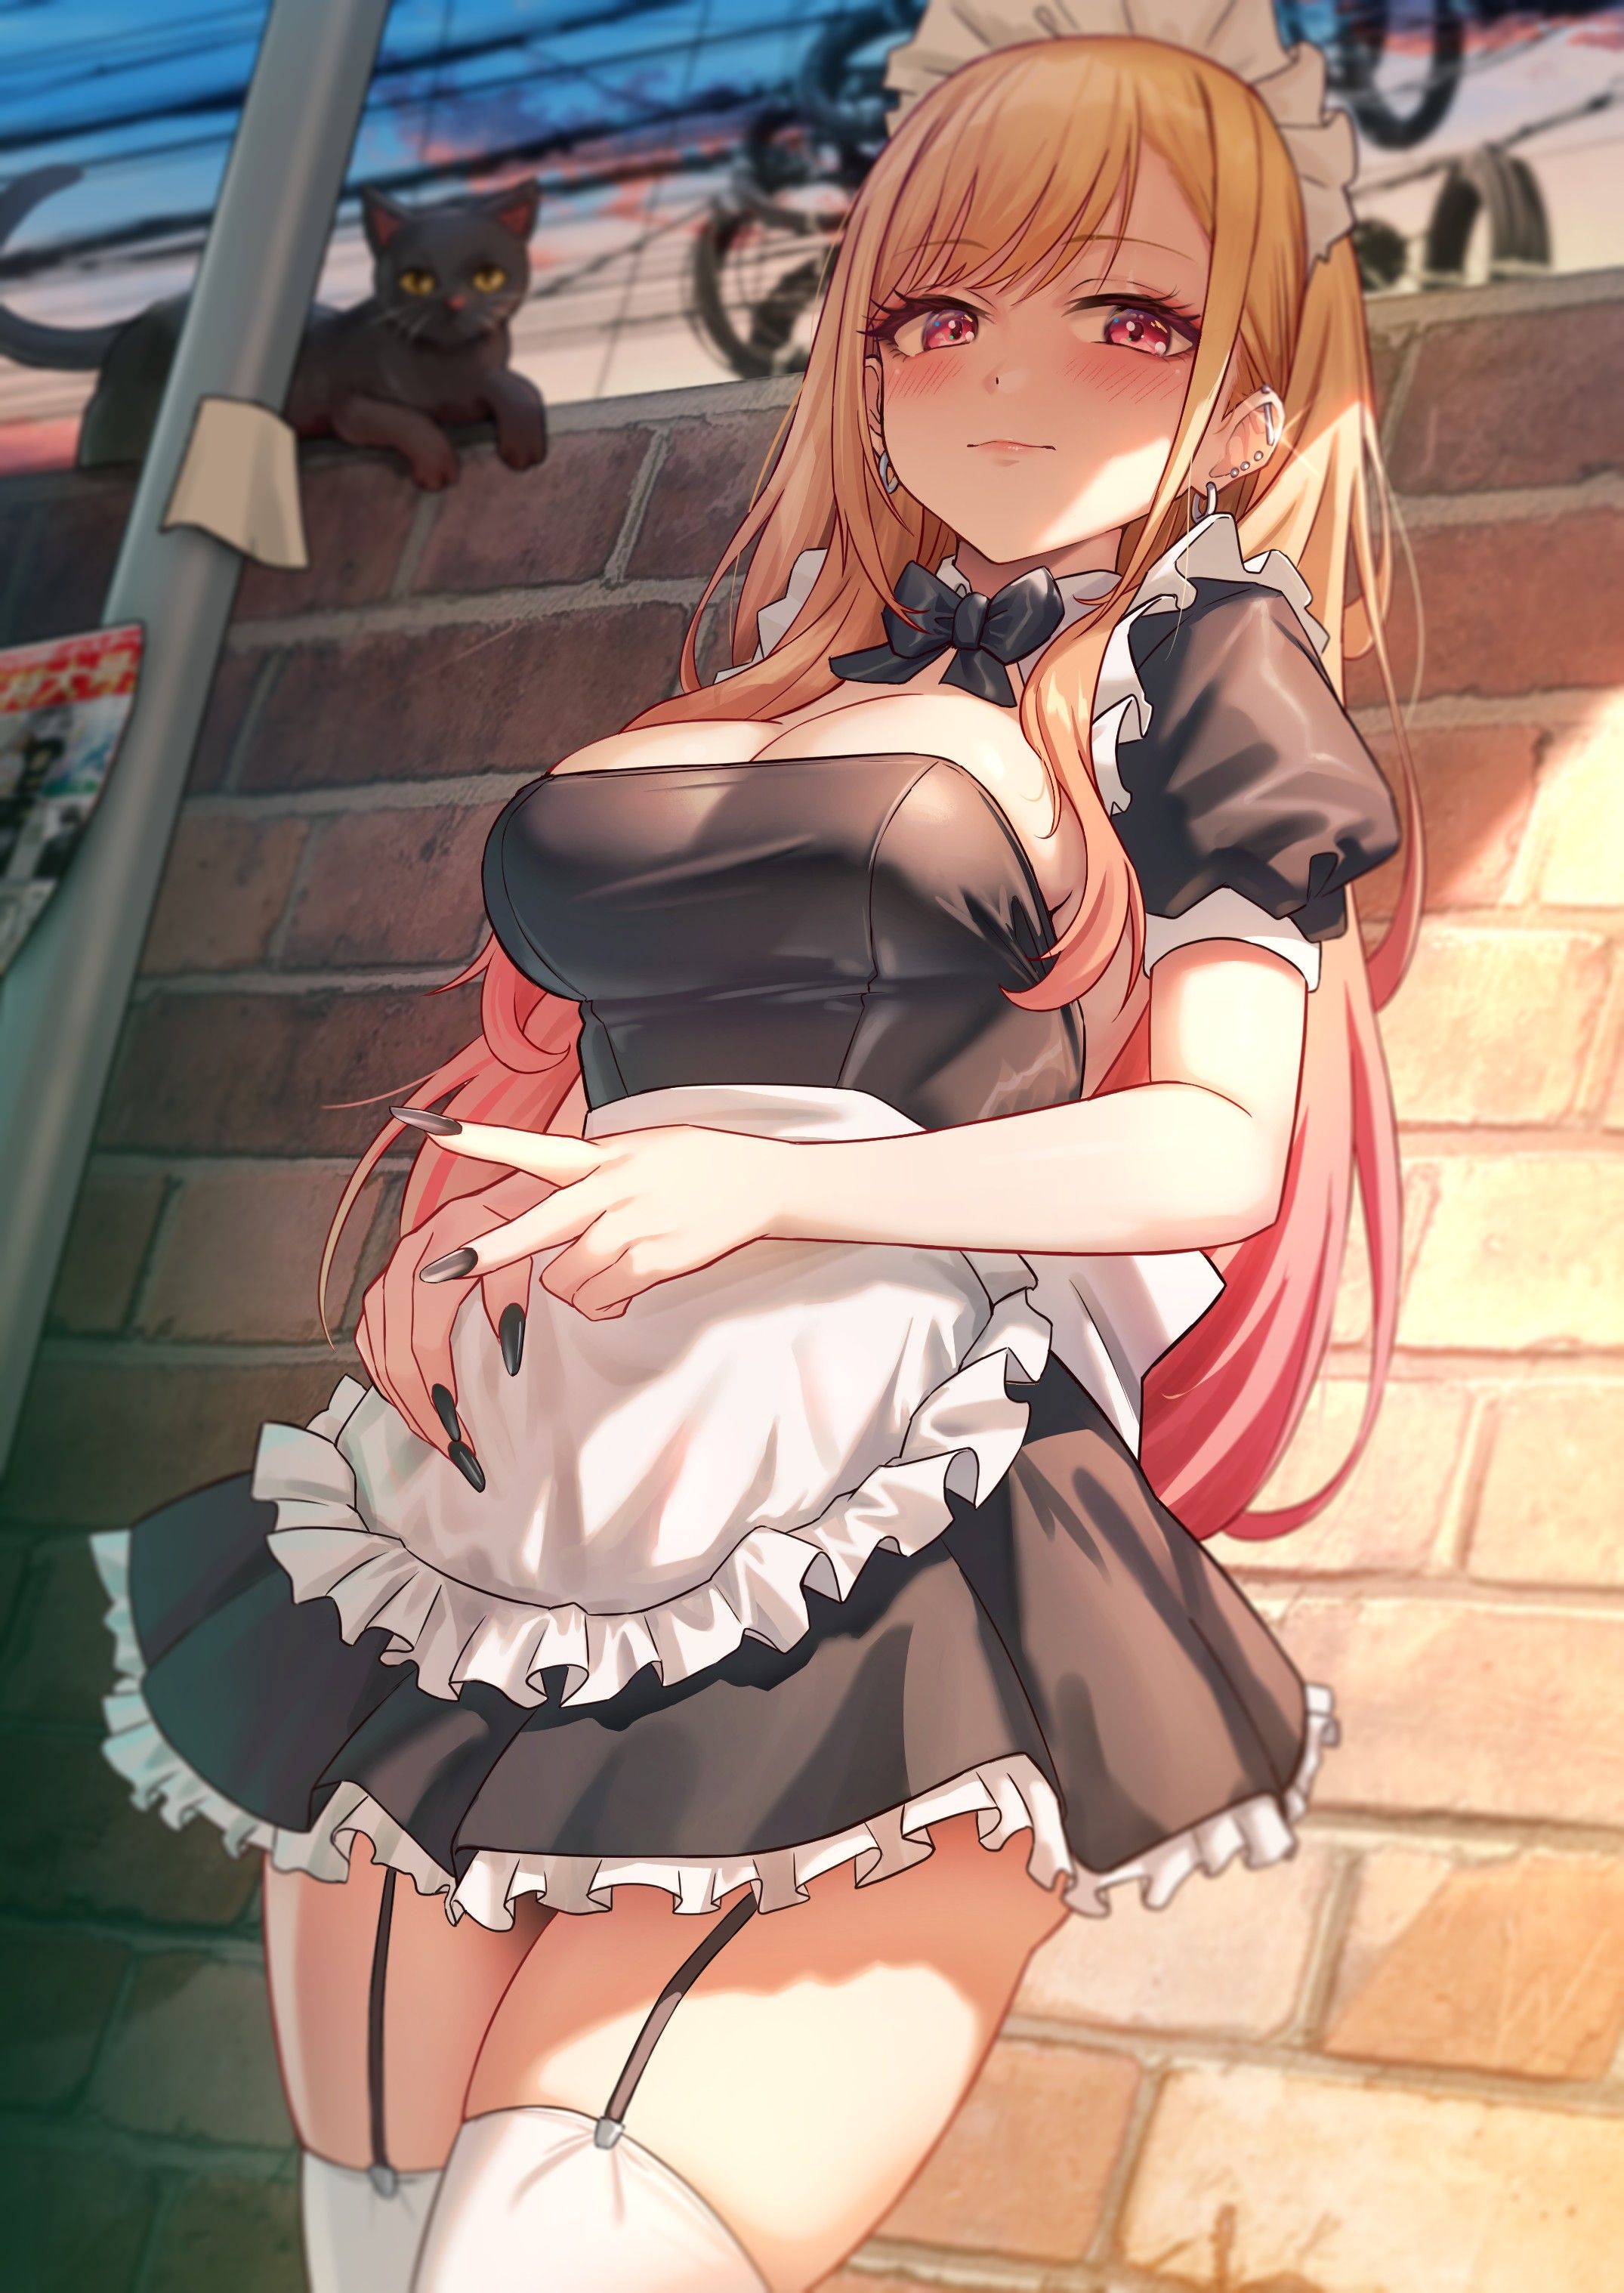 【2nd】Erotic image of a maid beautiful girl who wants to be served Part 29 6